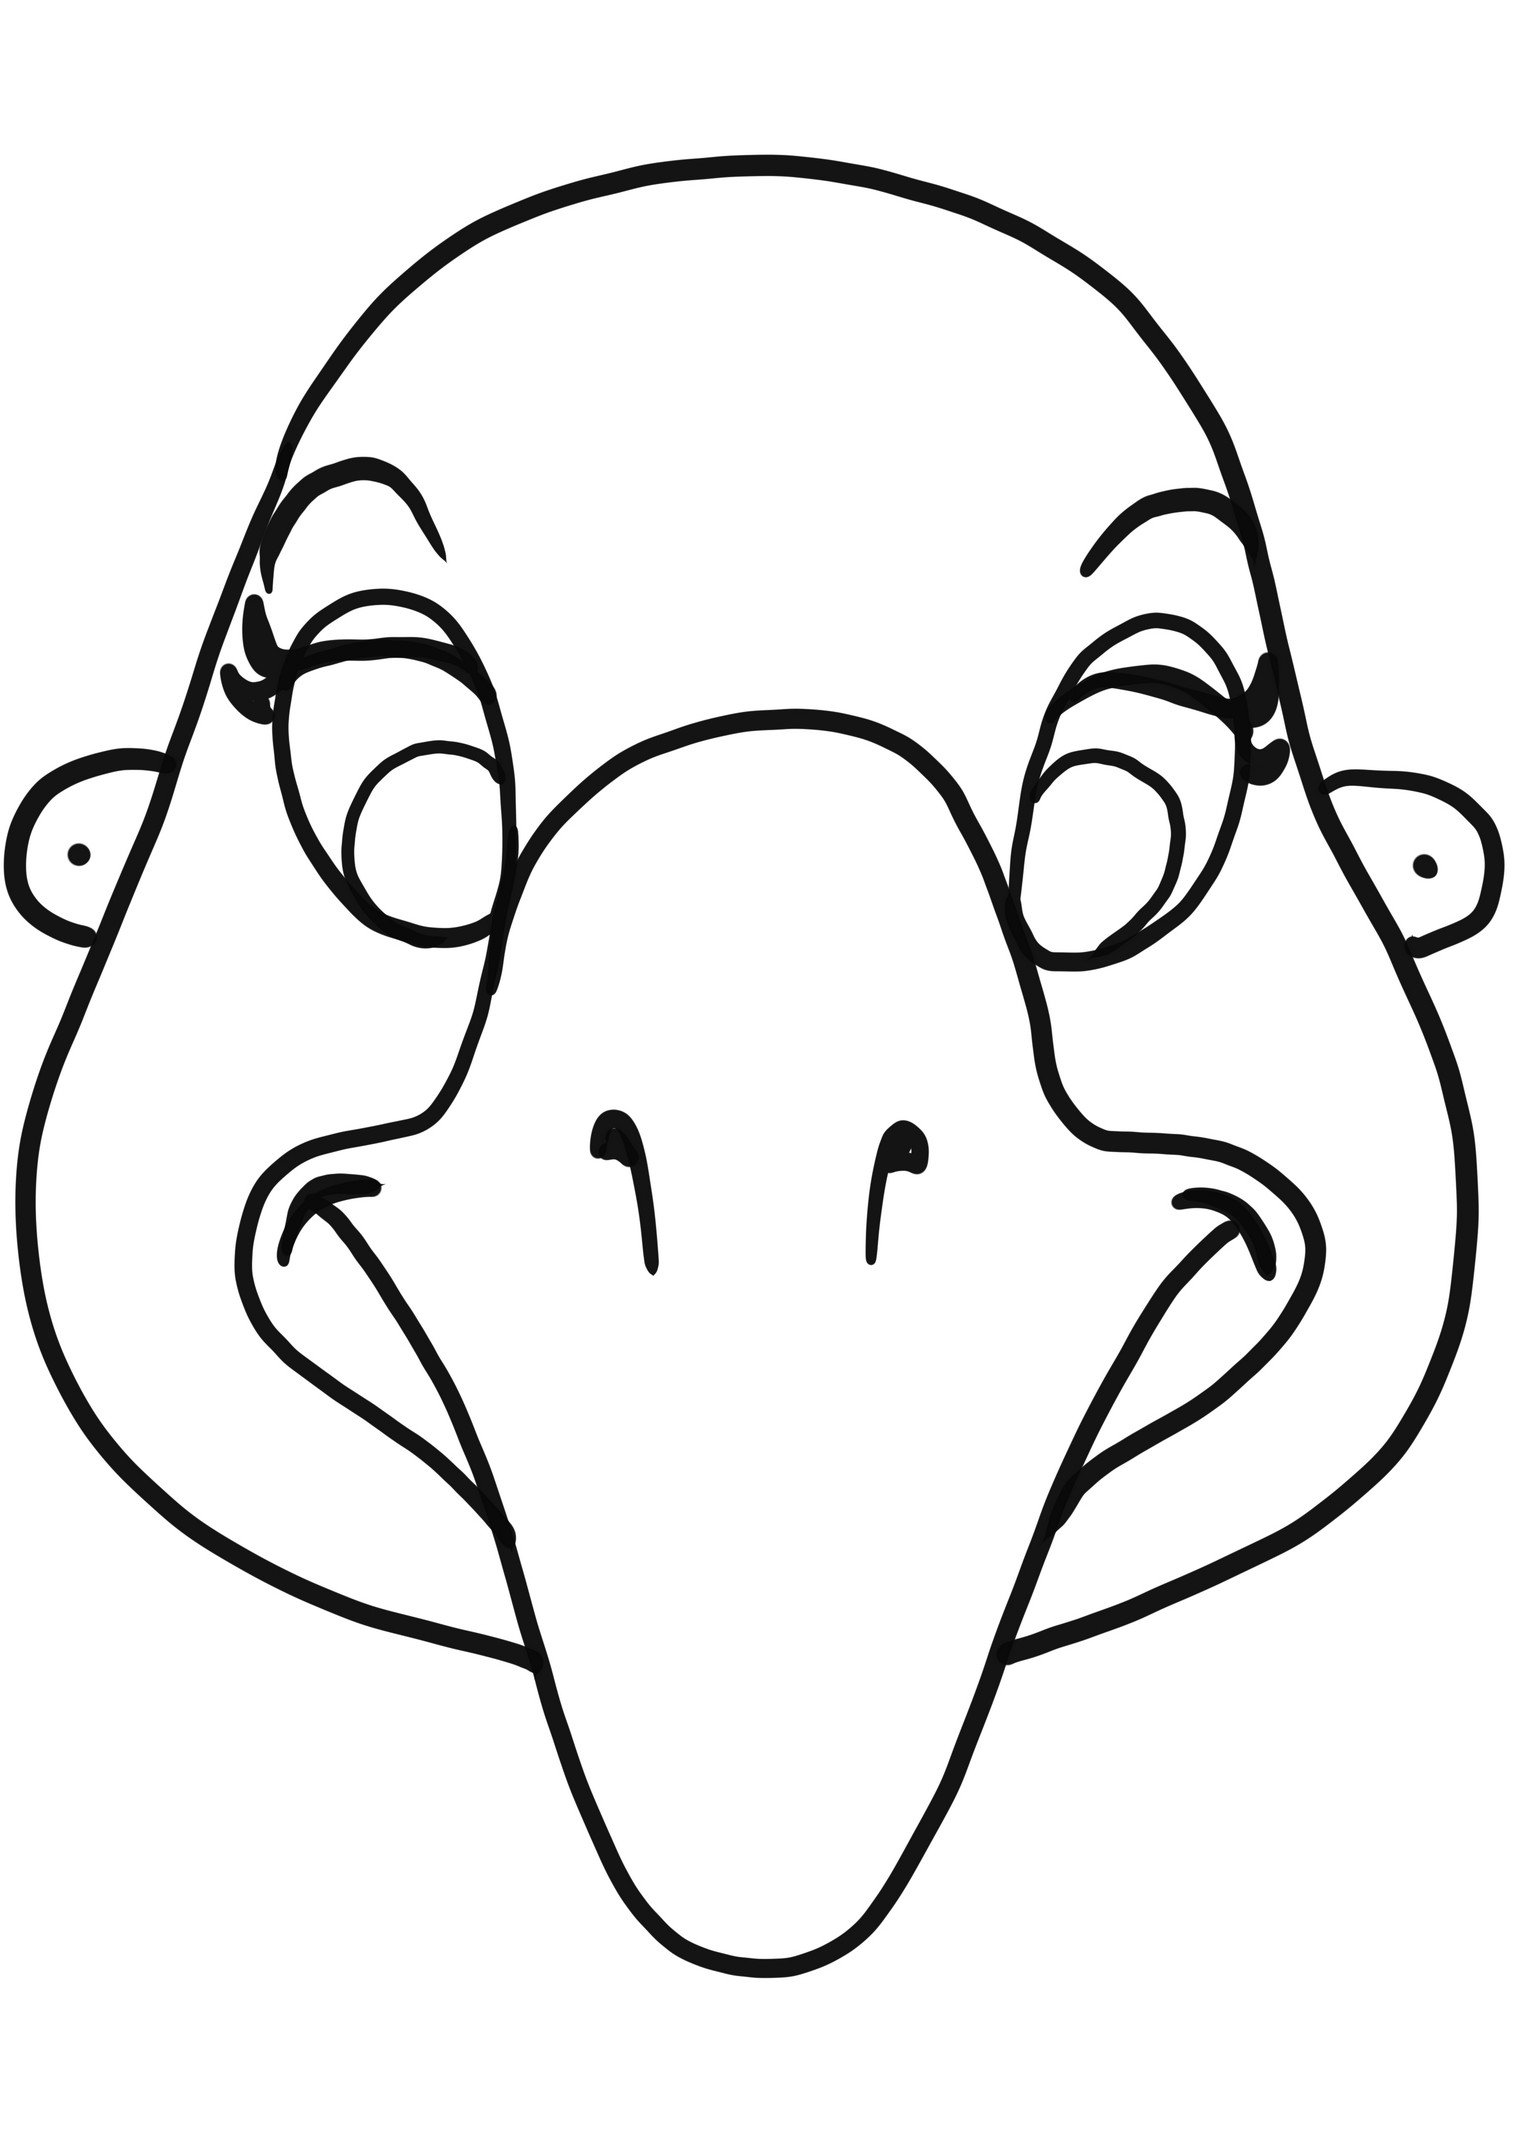 Goose mask coloring page